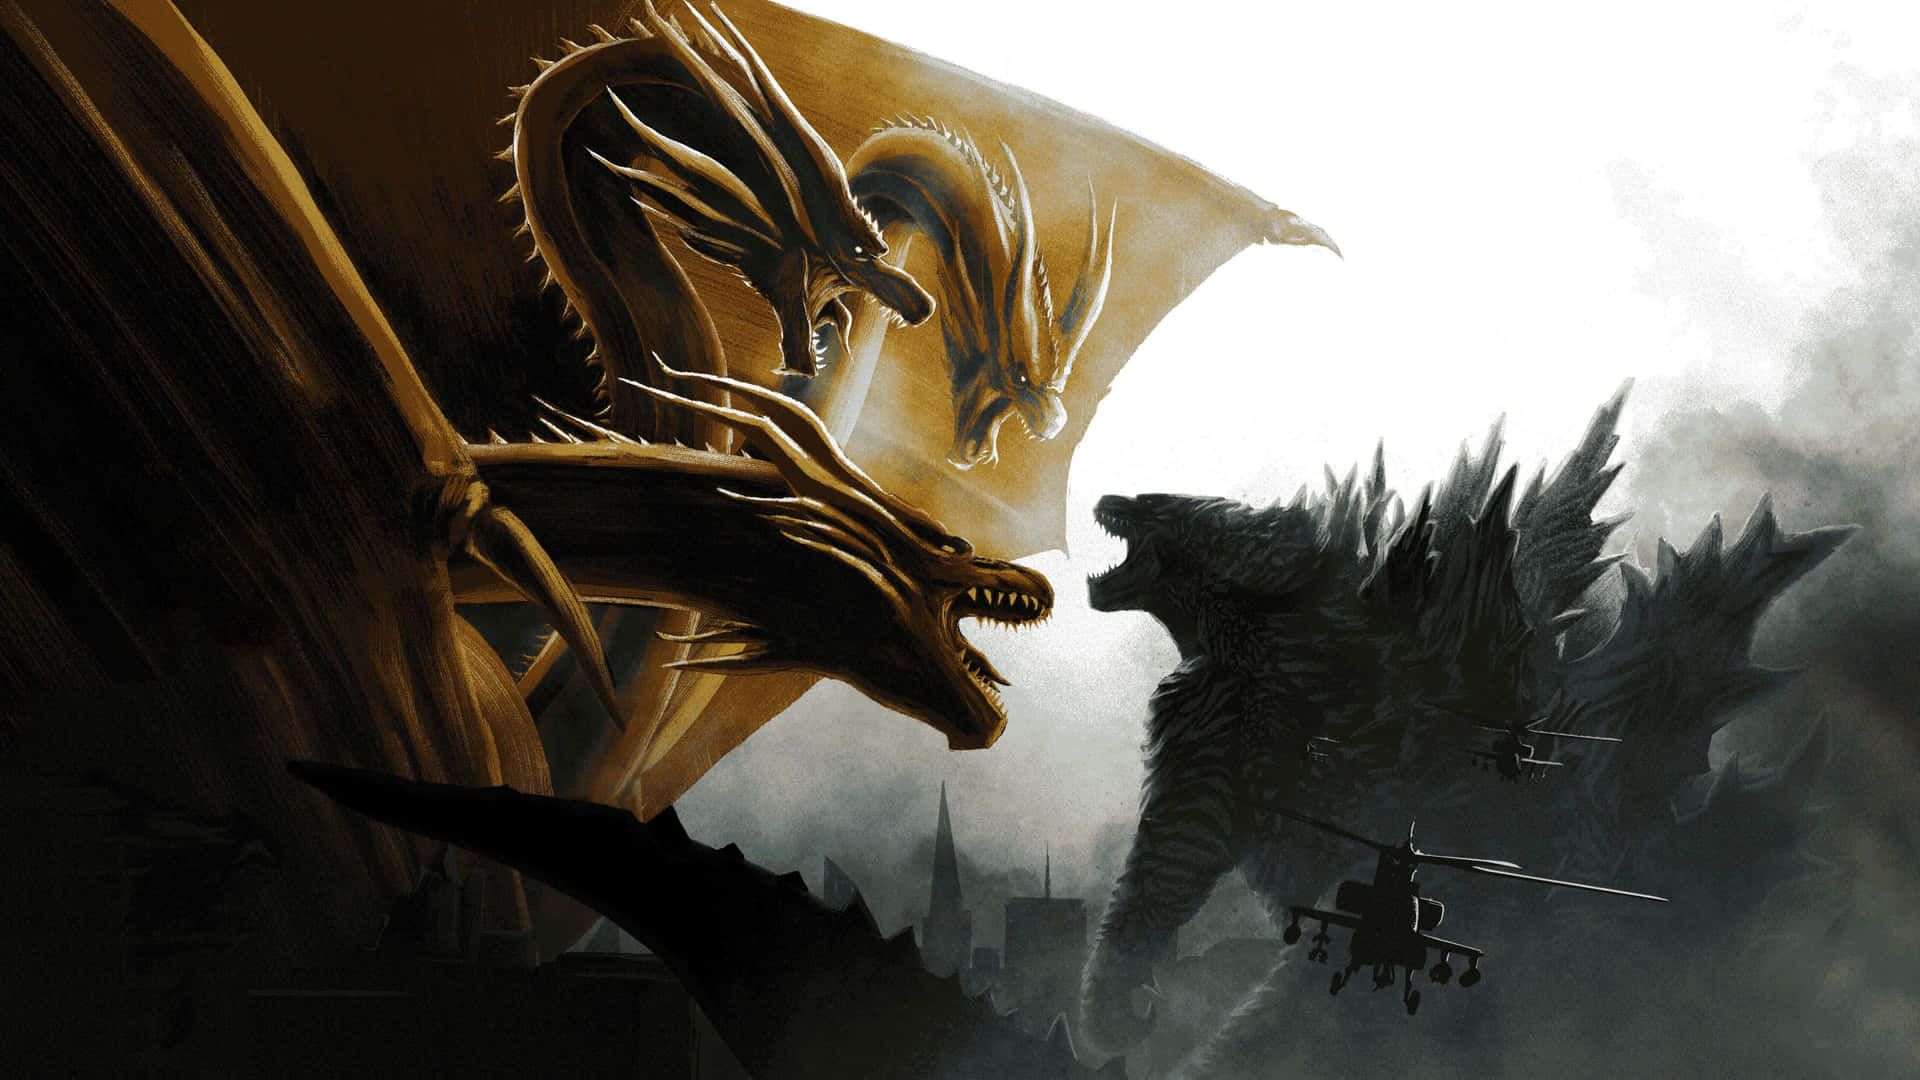 King Ghidorah - The three-headed dragon in action Wallpaper